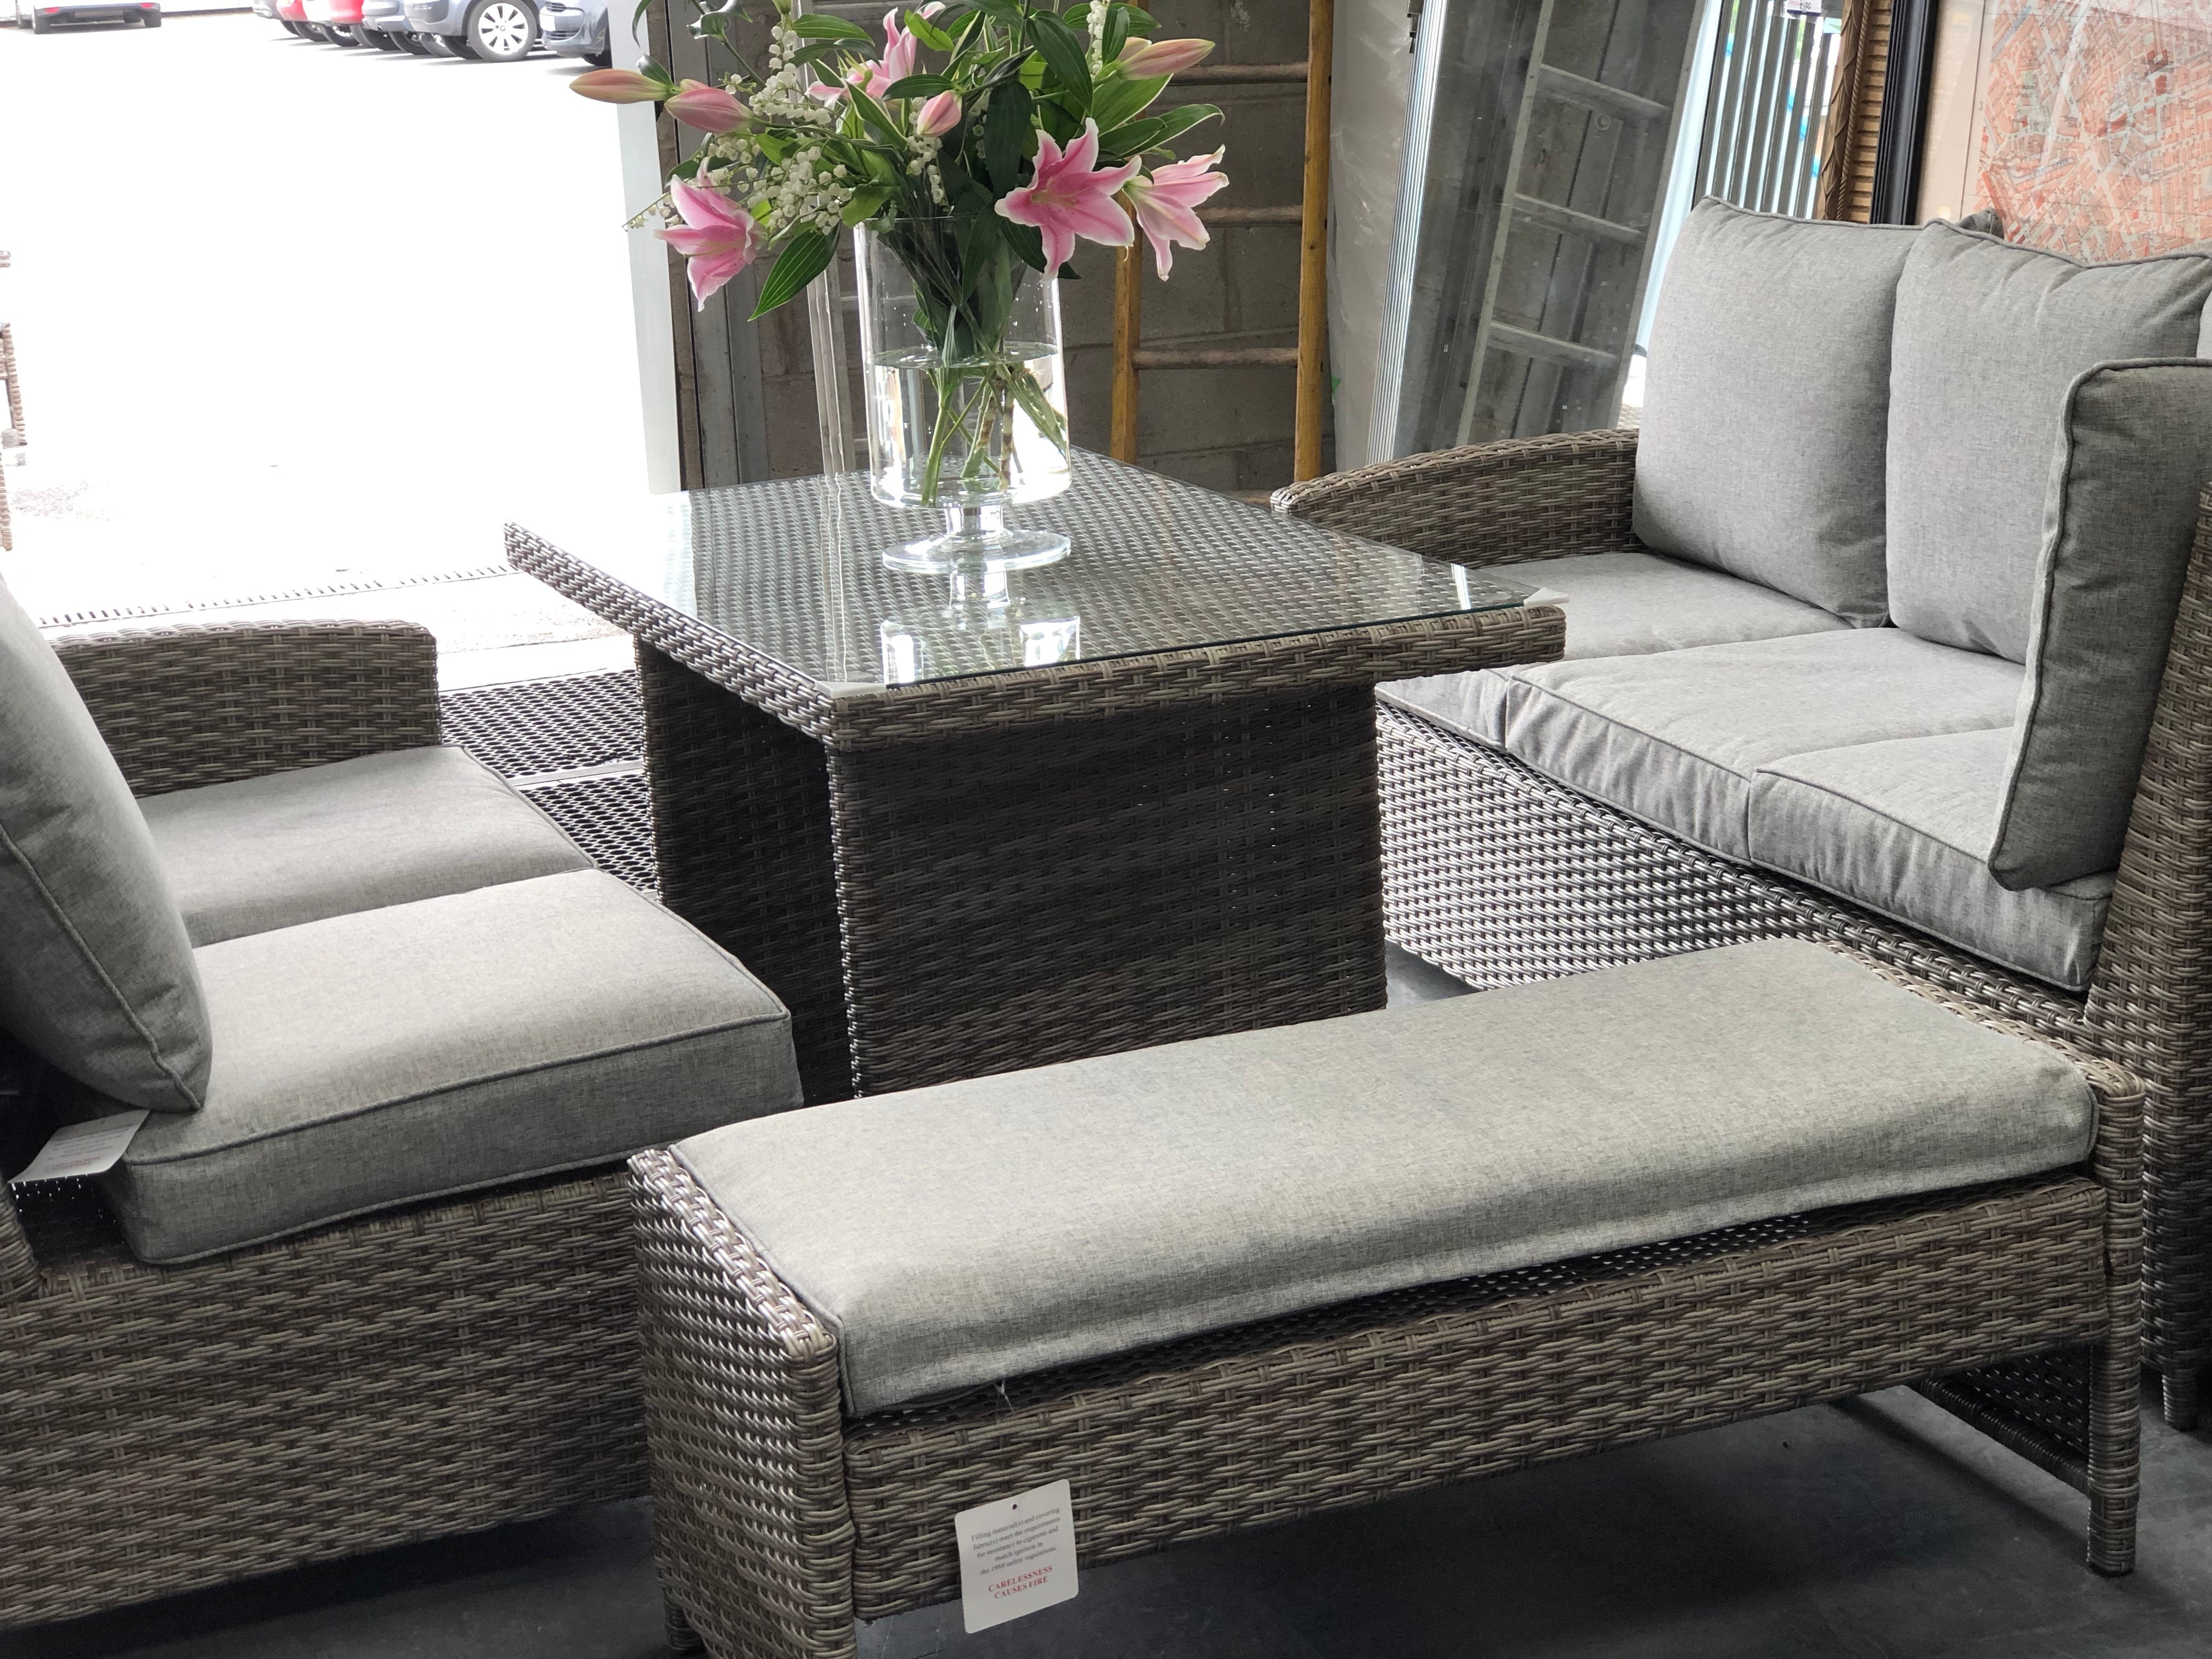 Rattan garden furniture from Top Secret Furniture outlet Cheshire